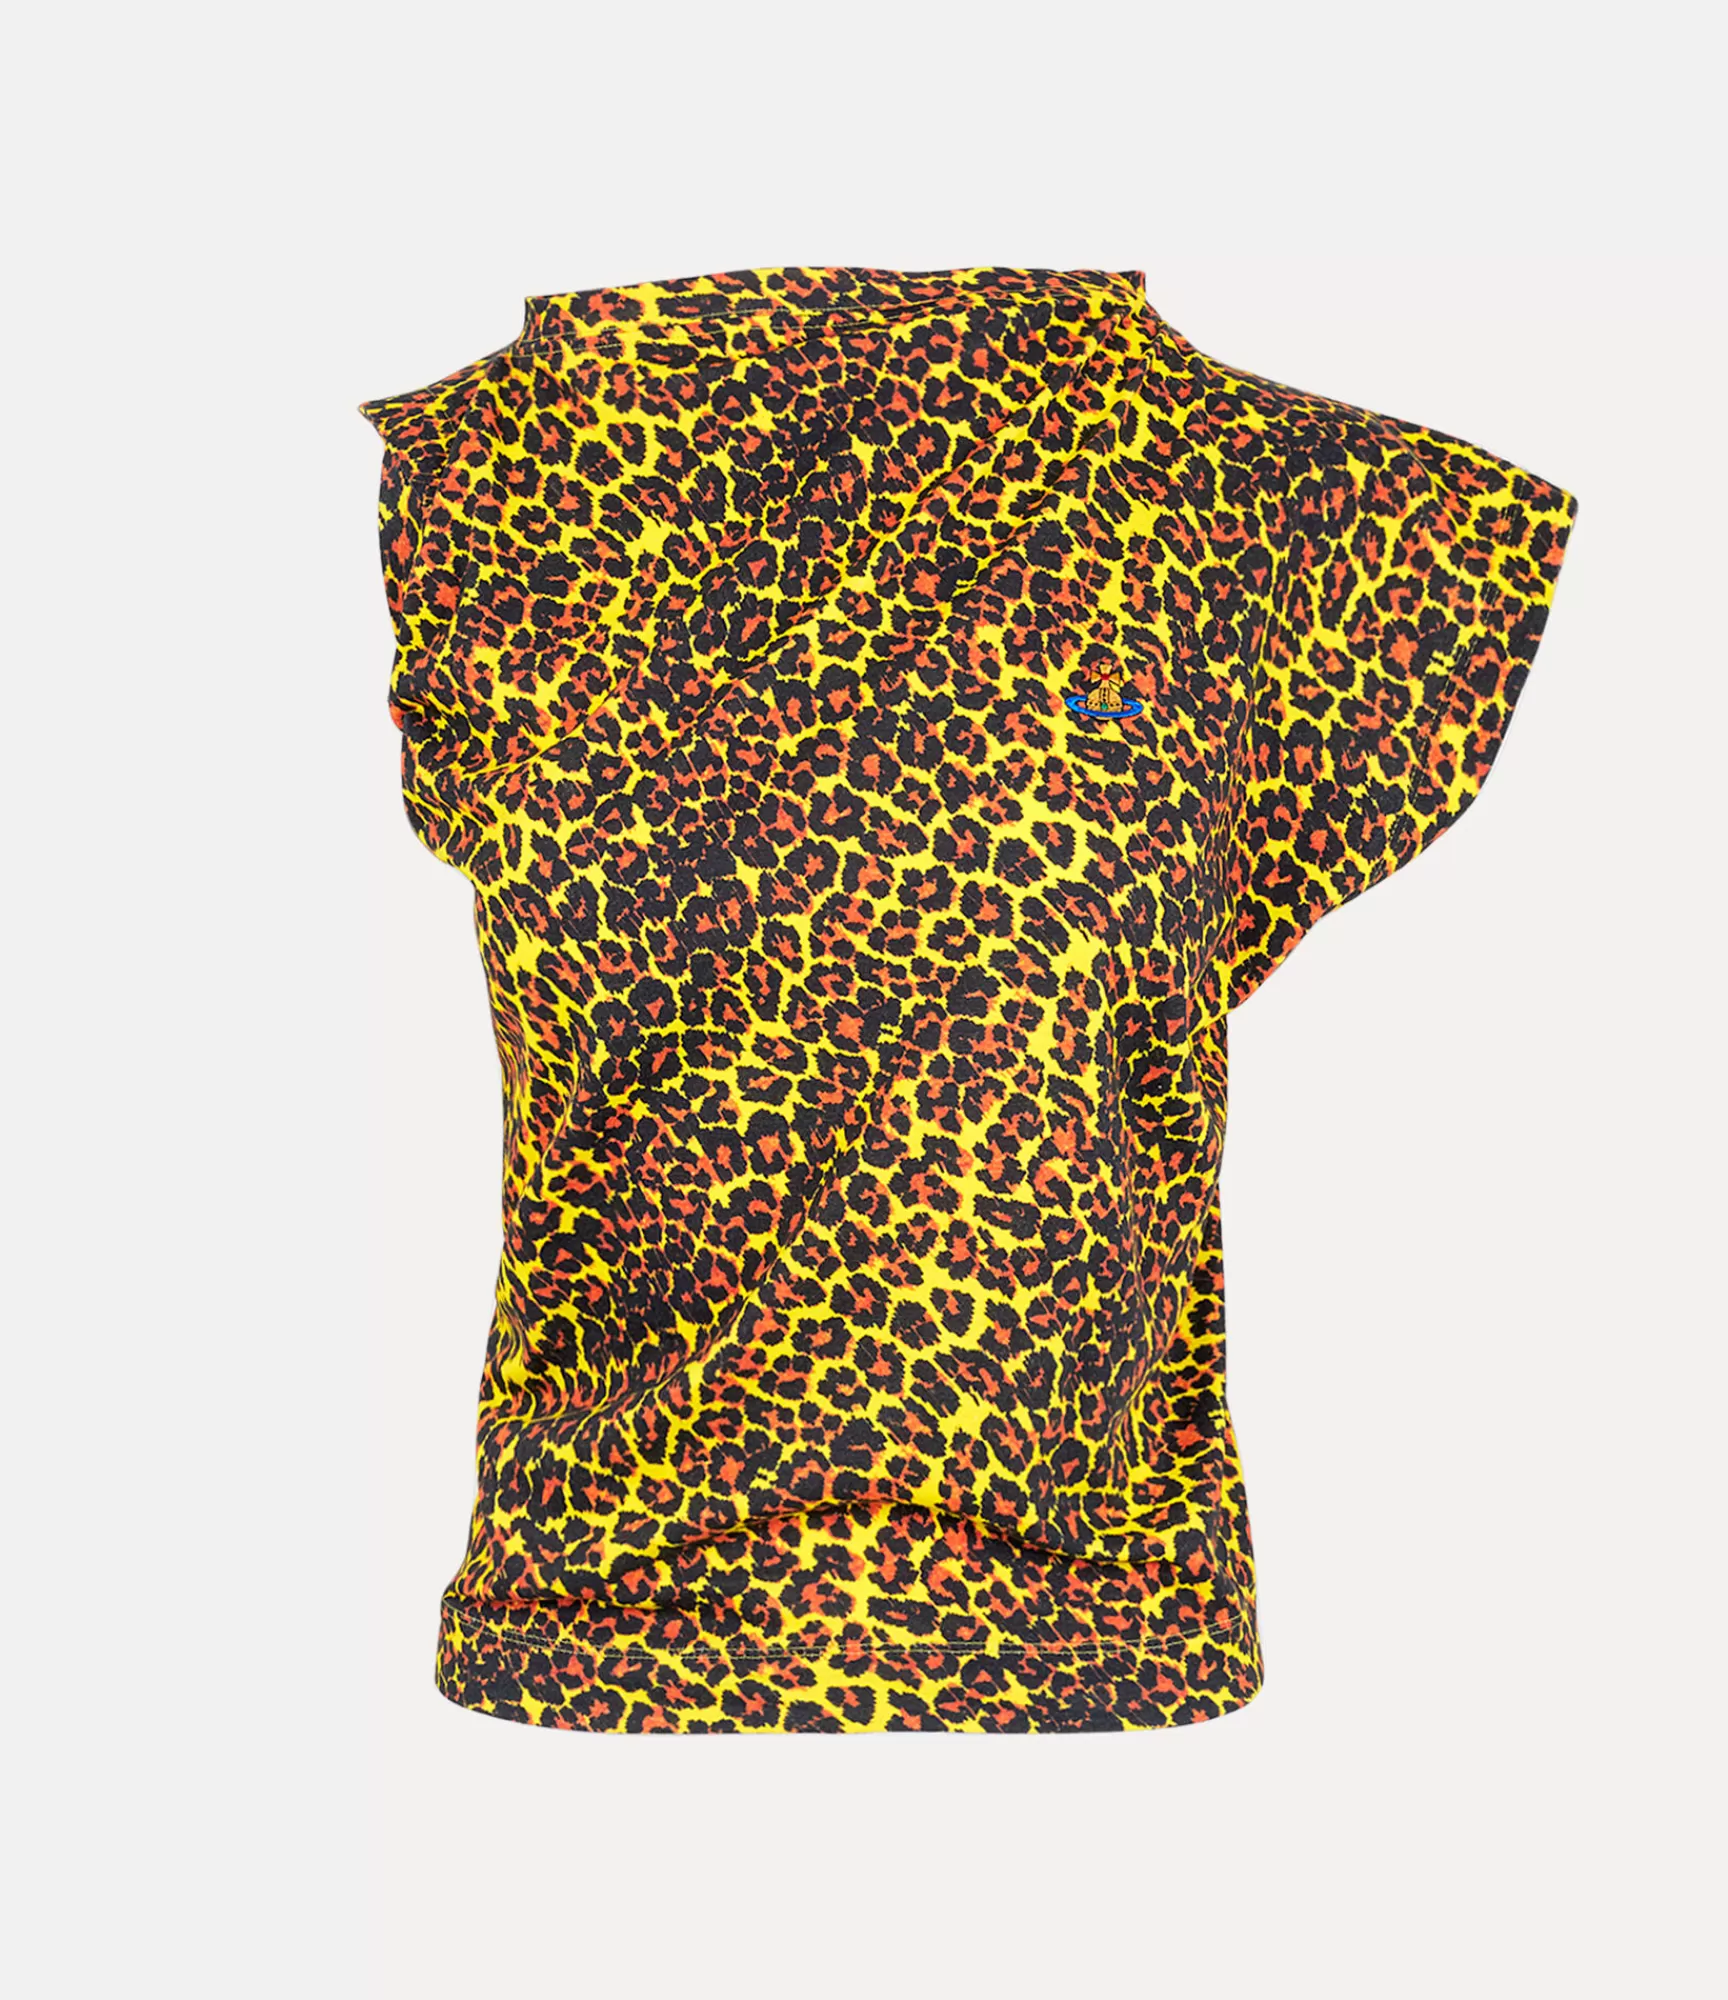 Vivienne Westwood Tops and Shirts*Hebo top Leopard